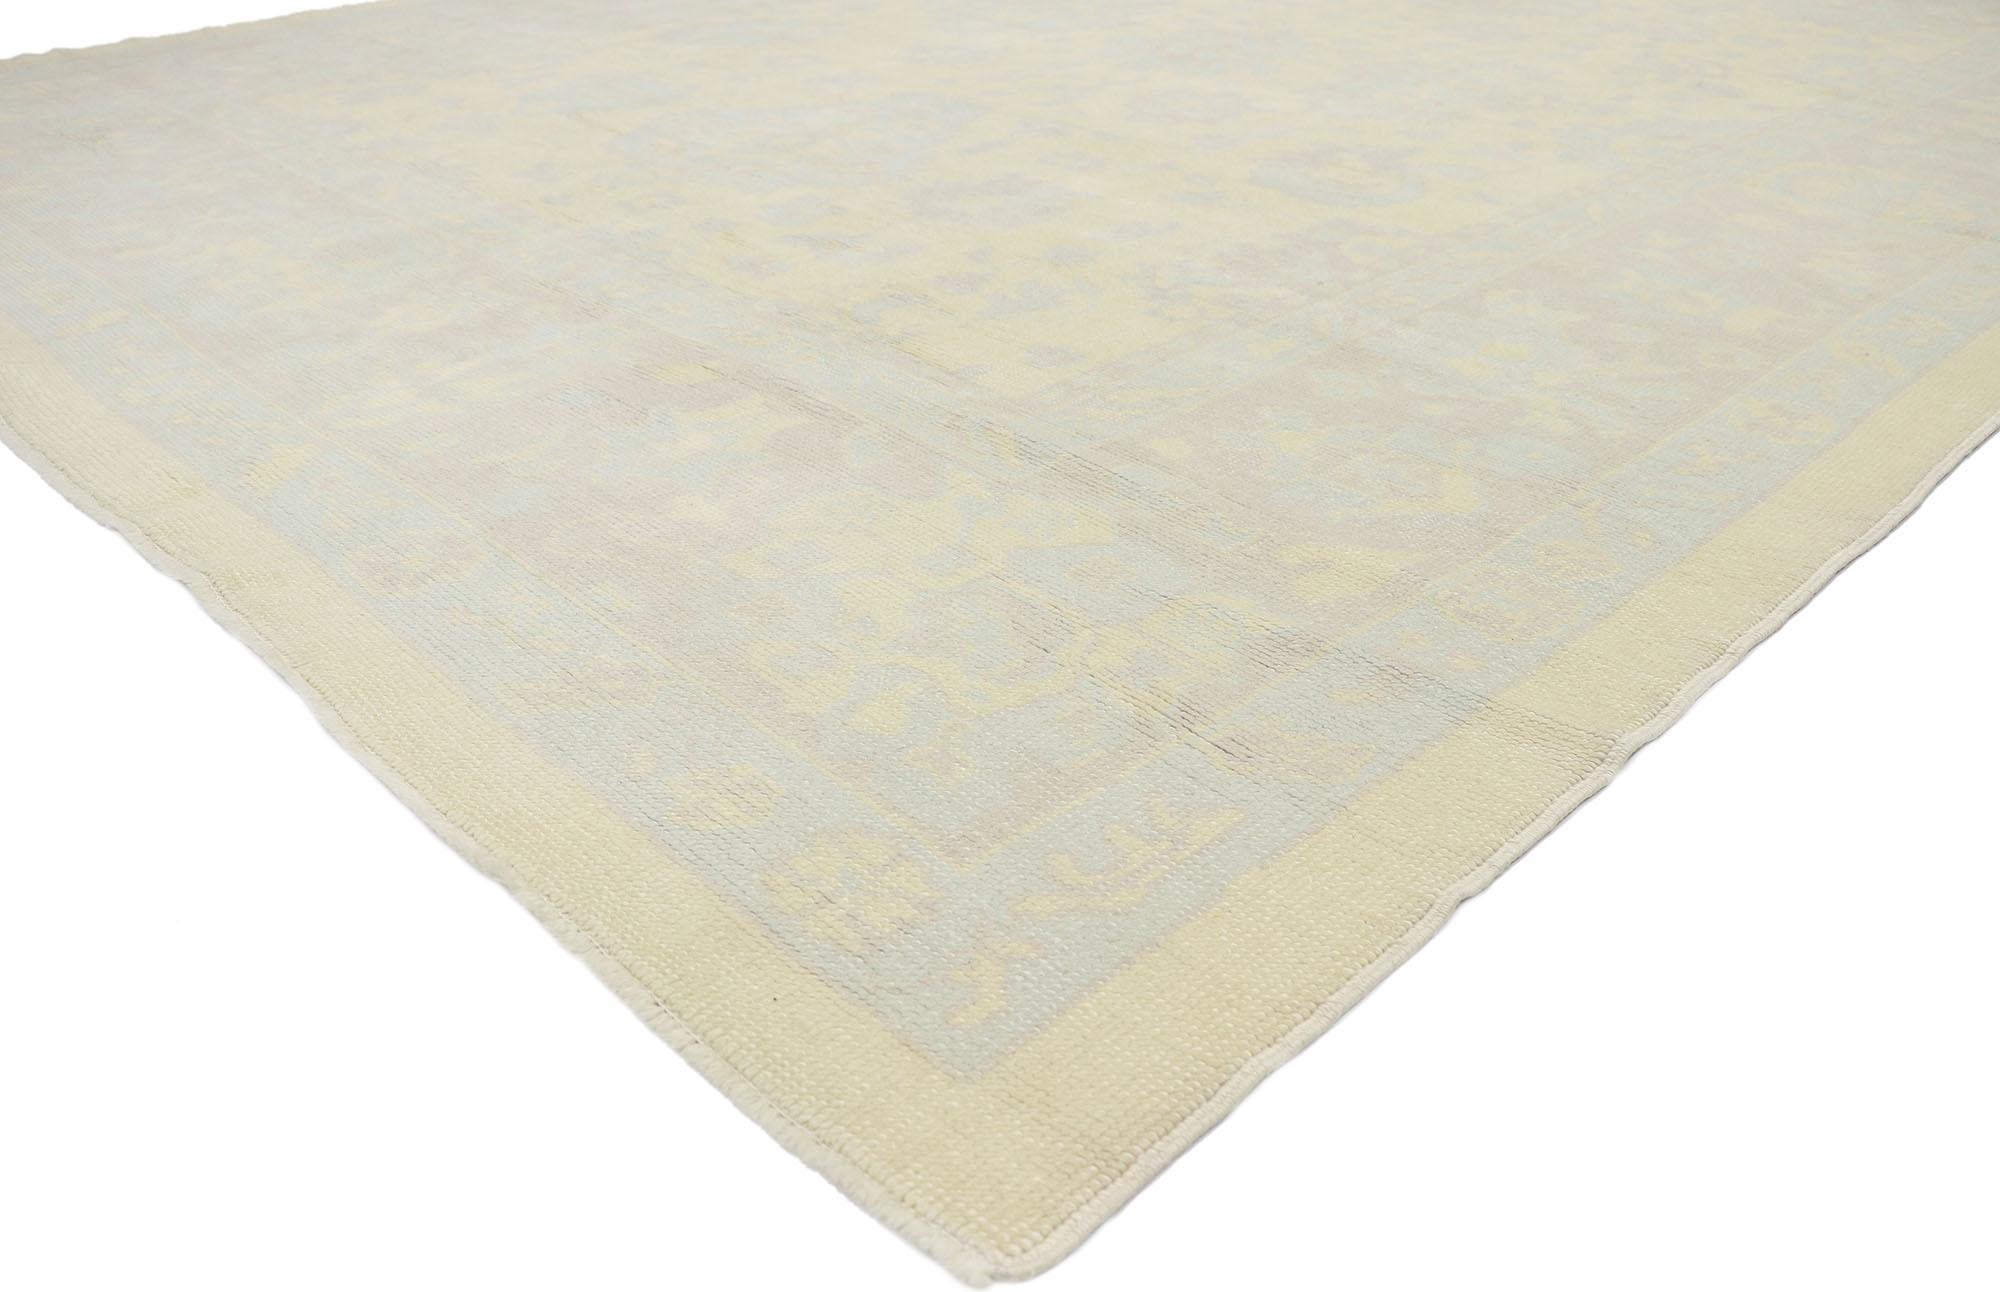 53156, Muted Pastel Turkish Oushak Rug. Blending elements from the modern world with pastel colors, this hand knotted wool contemporary Turkish Oushak rug will boost the coziness factor in nearly any space. The geometric print and warm hues woven